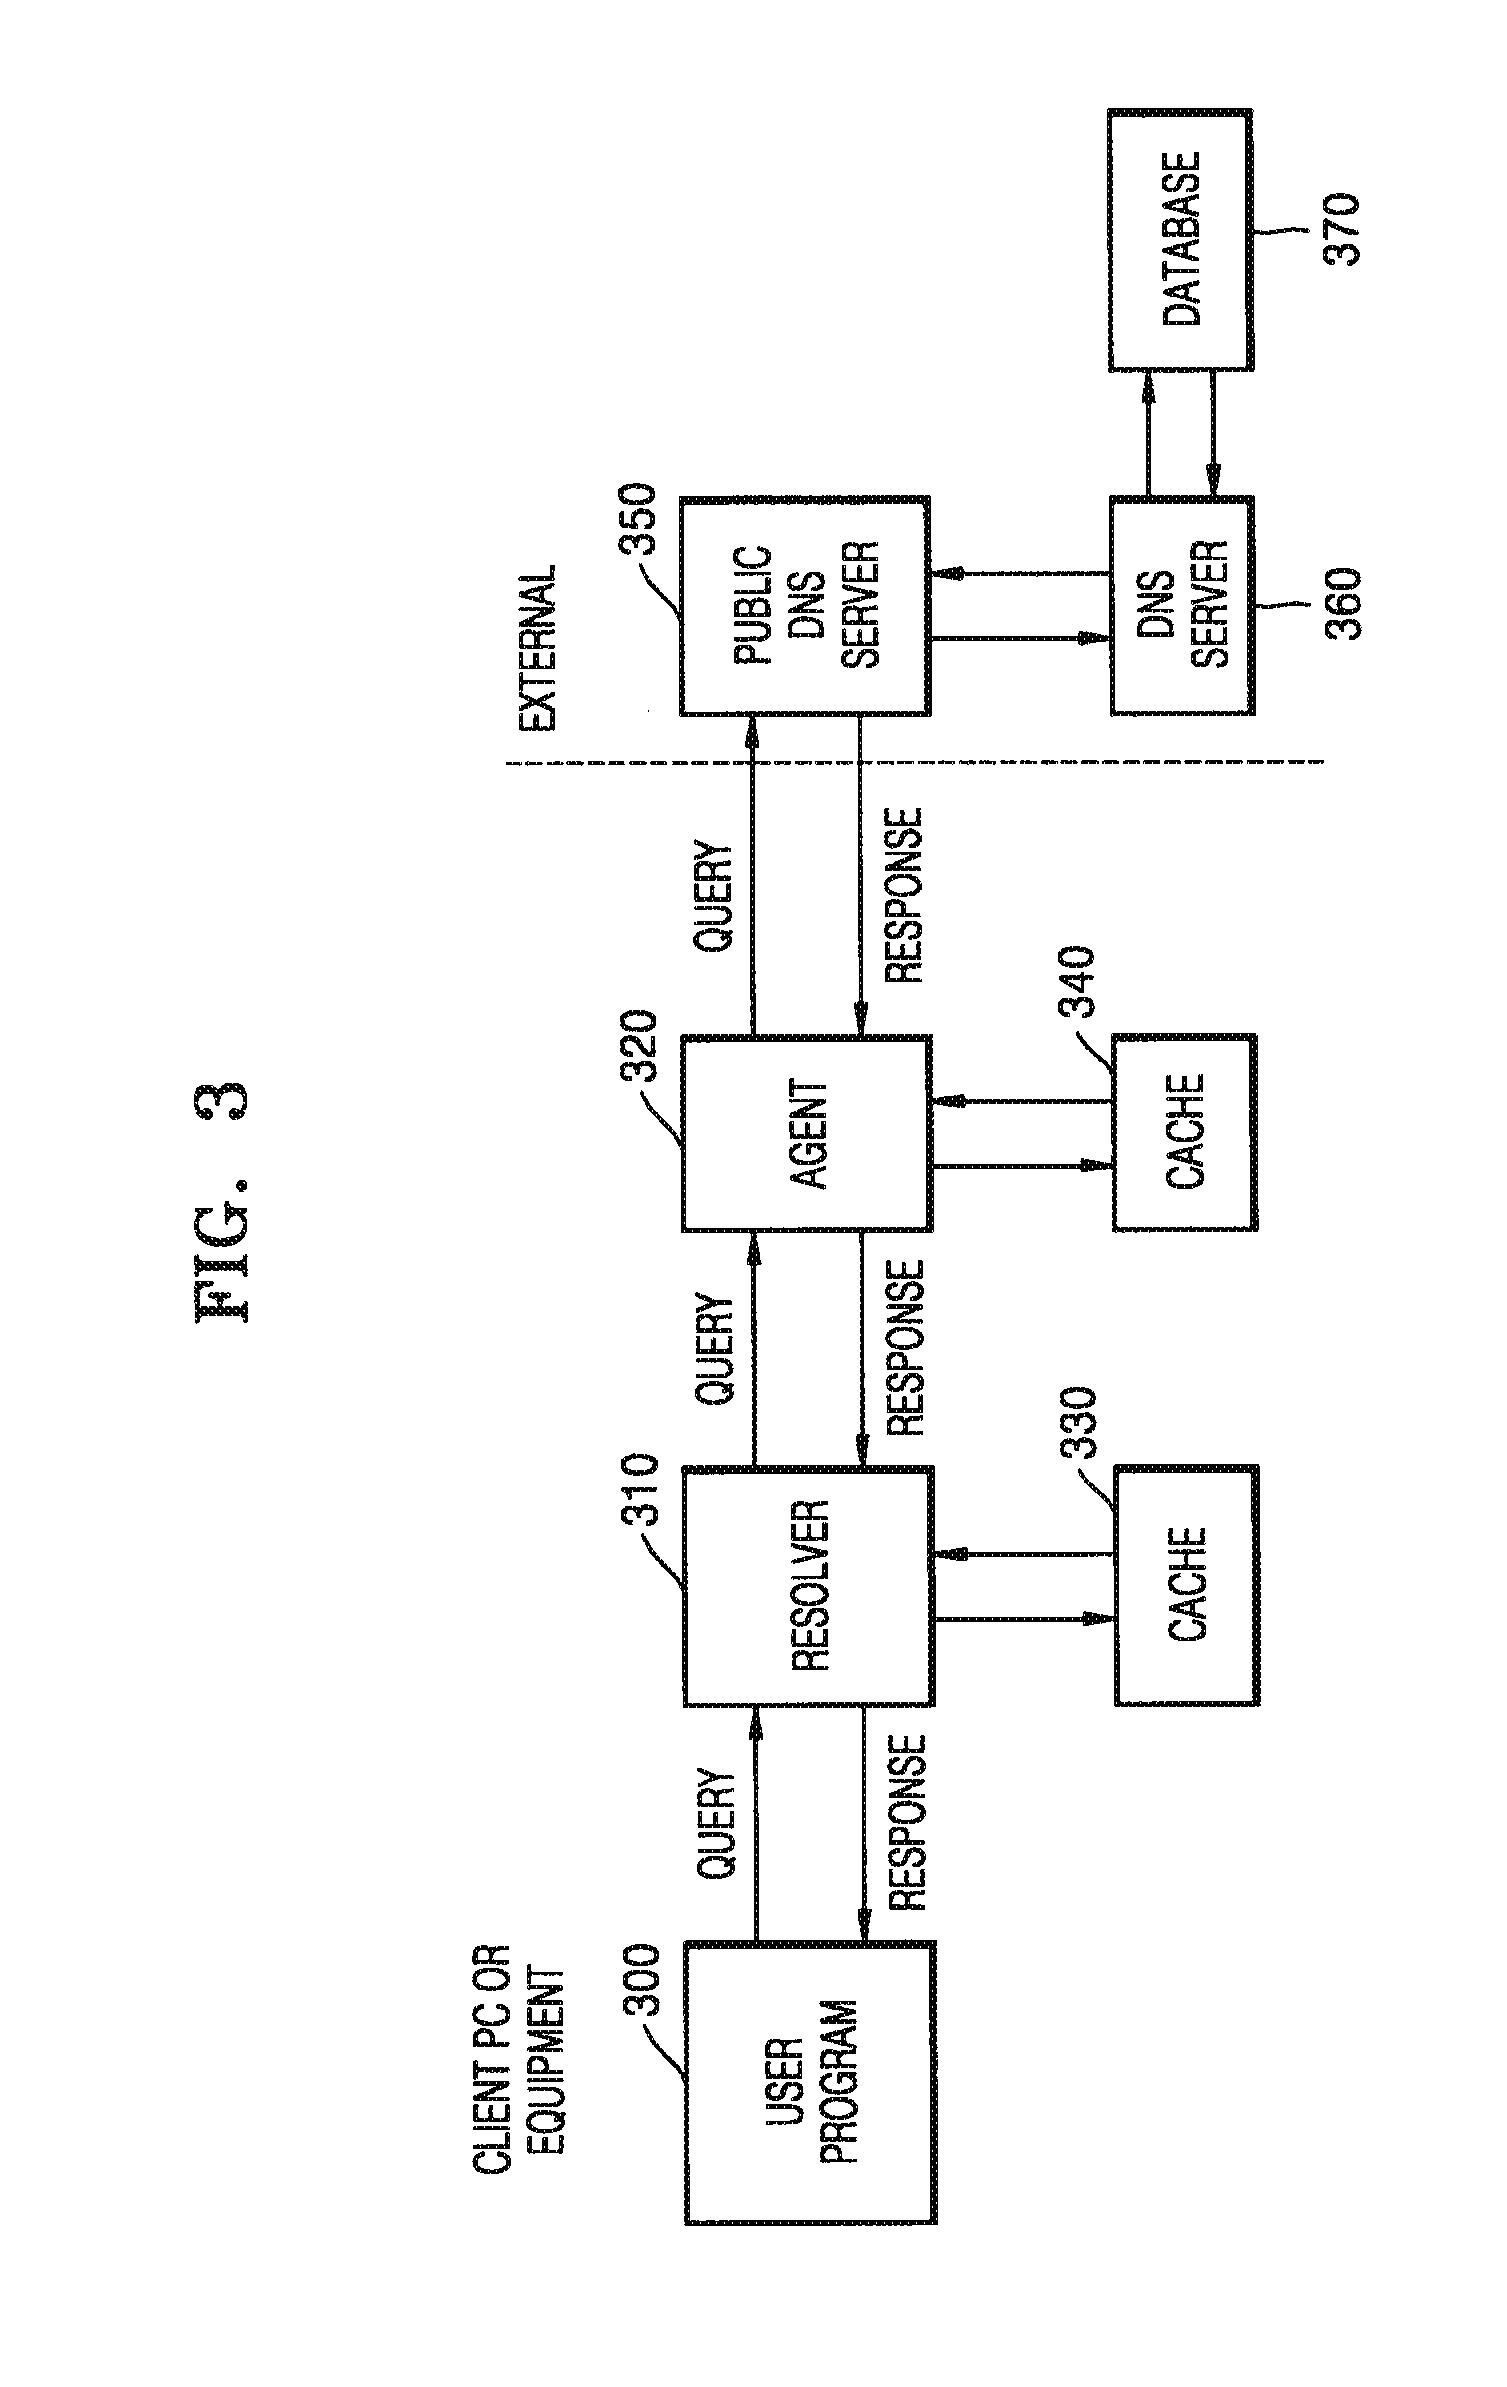 Domain name system (DNS) and domain name service method based on user information